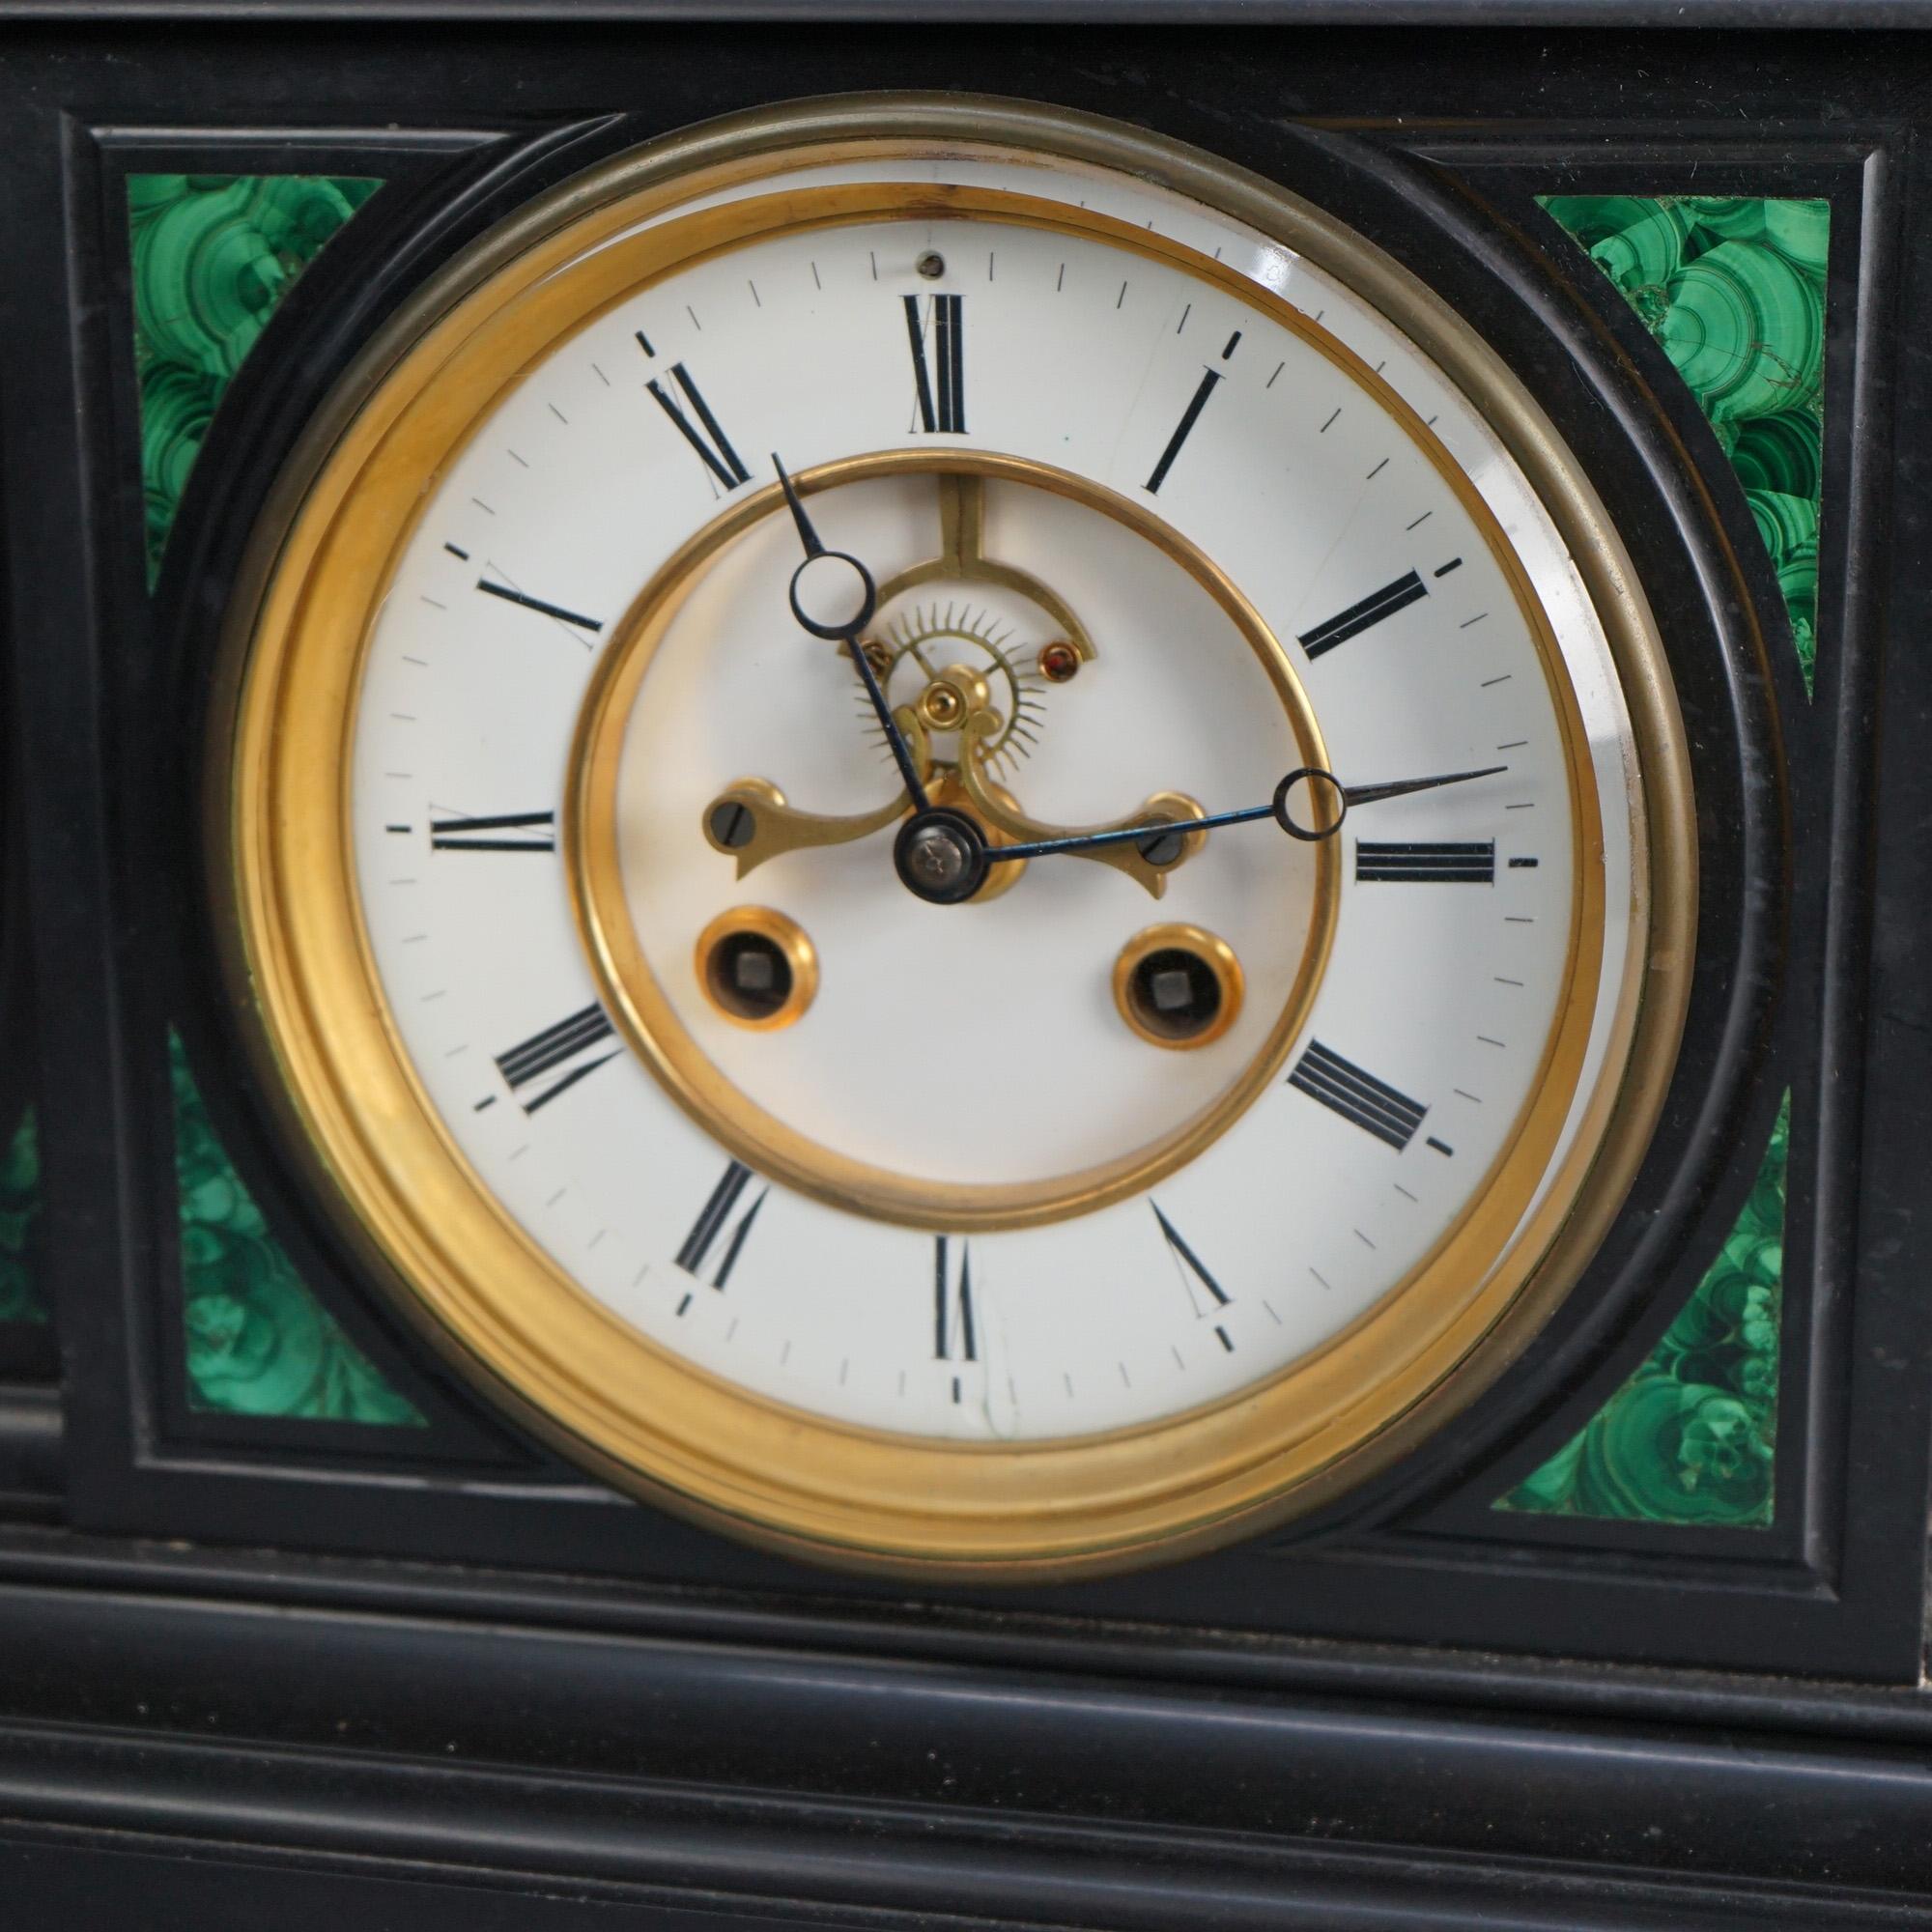 Antique Open Escapement Marble with Malachite Mantle Clock in the Manner of Tiffany c1900

Measures - 15.5